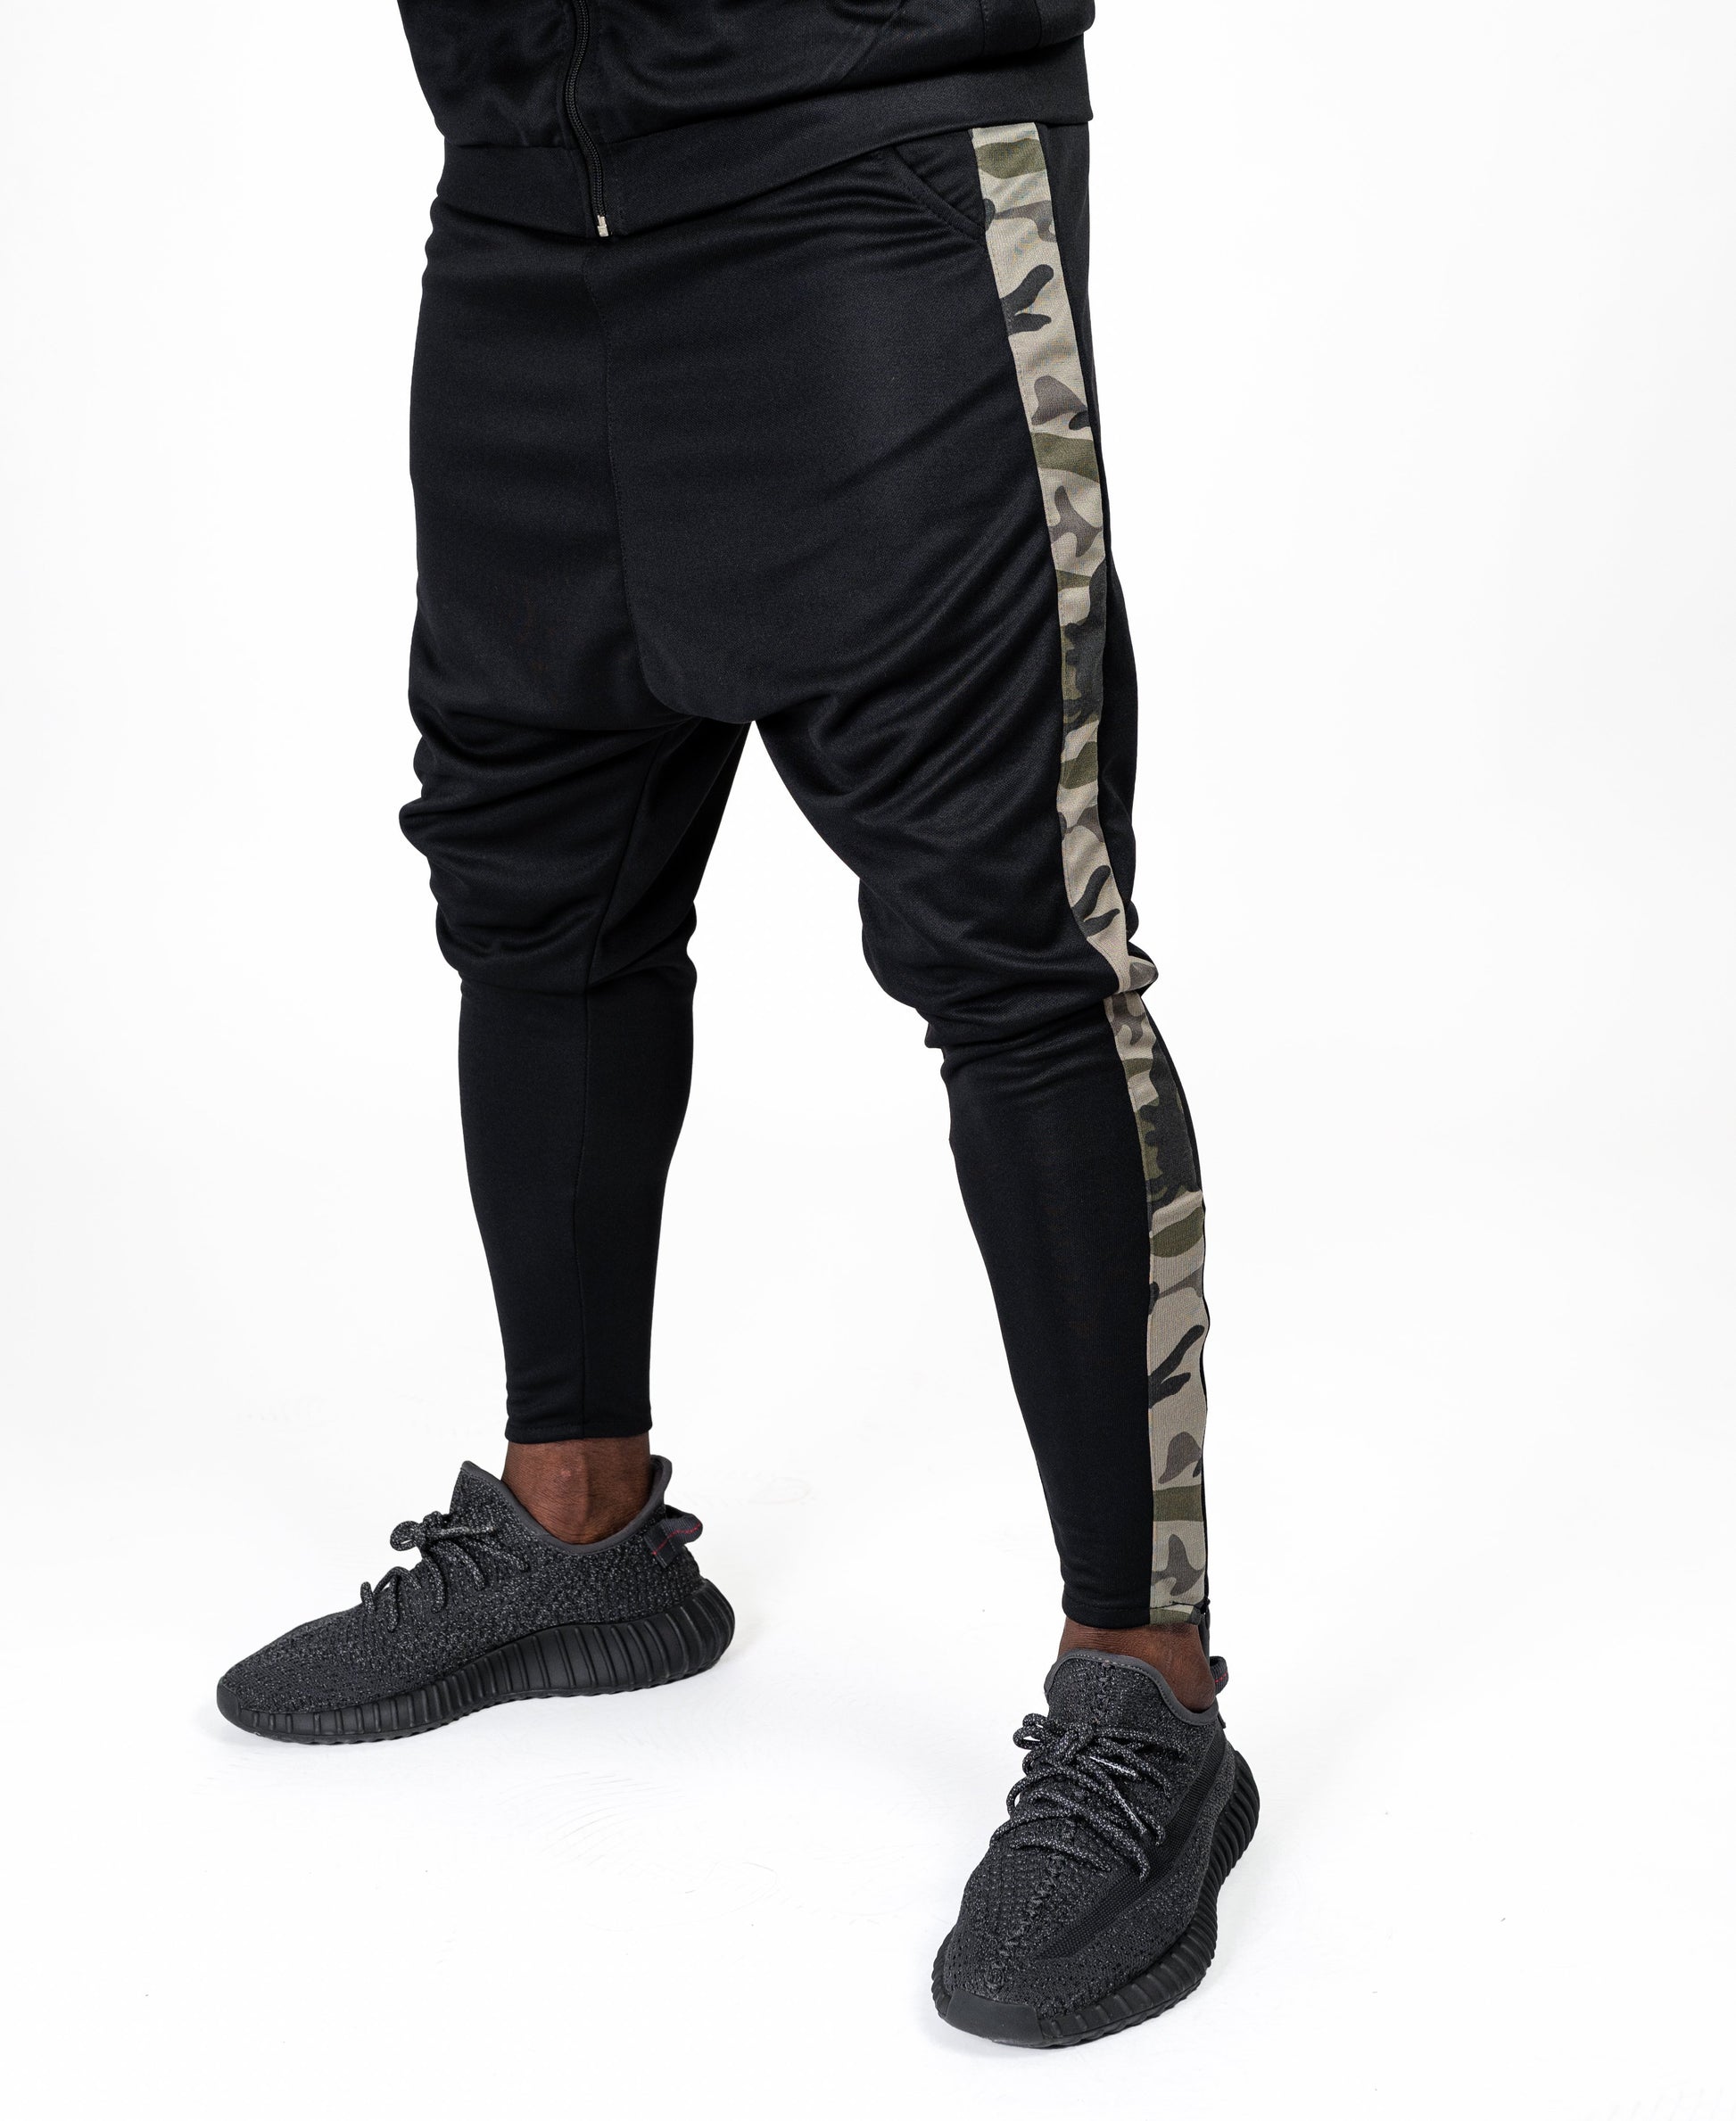 Black trousers with camo line - Fatai Style